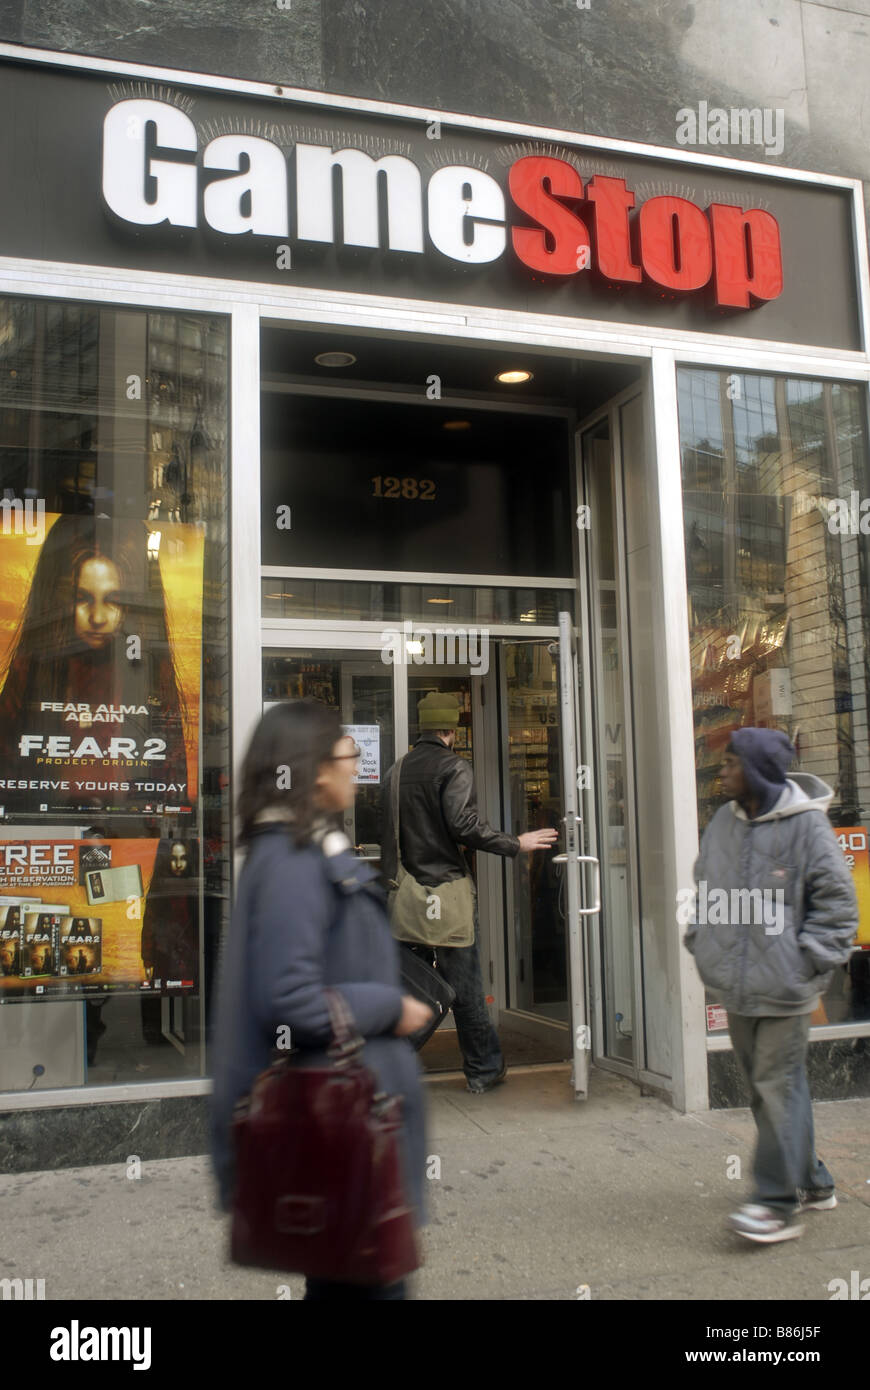 A Gamestop video game store in New York Stock Photo